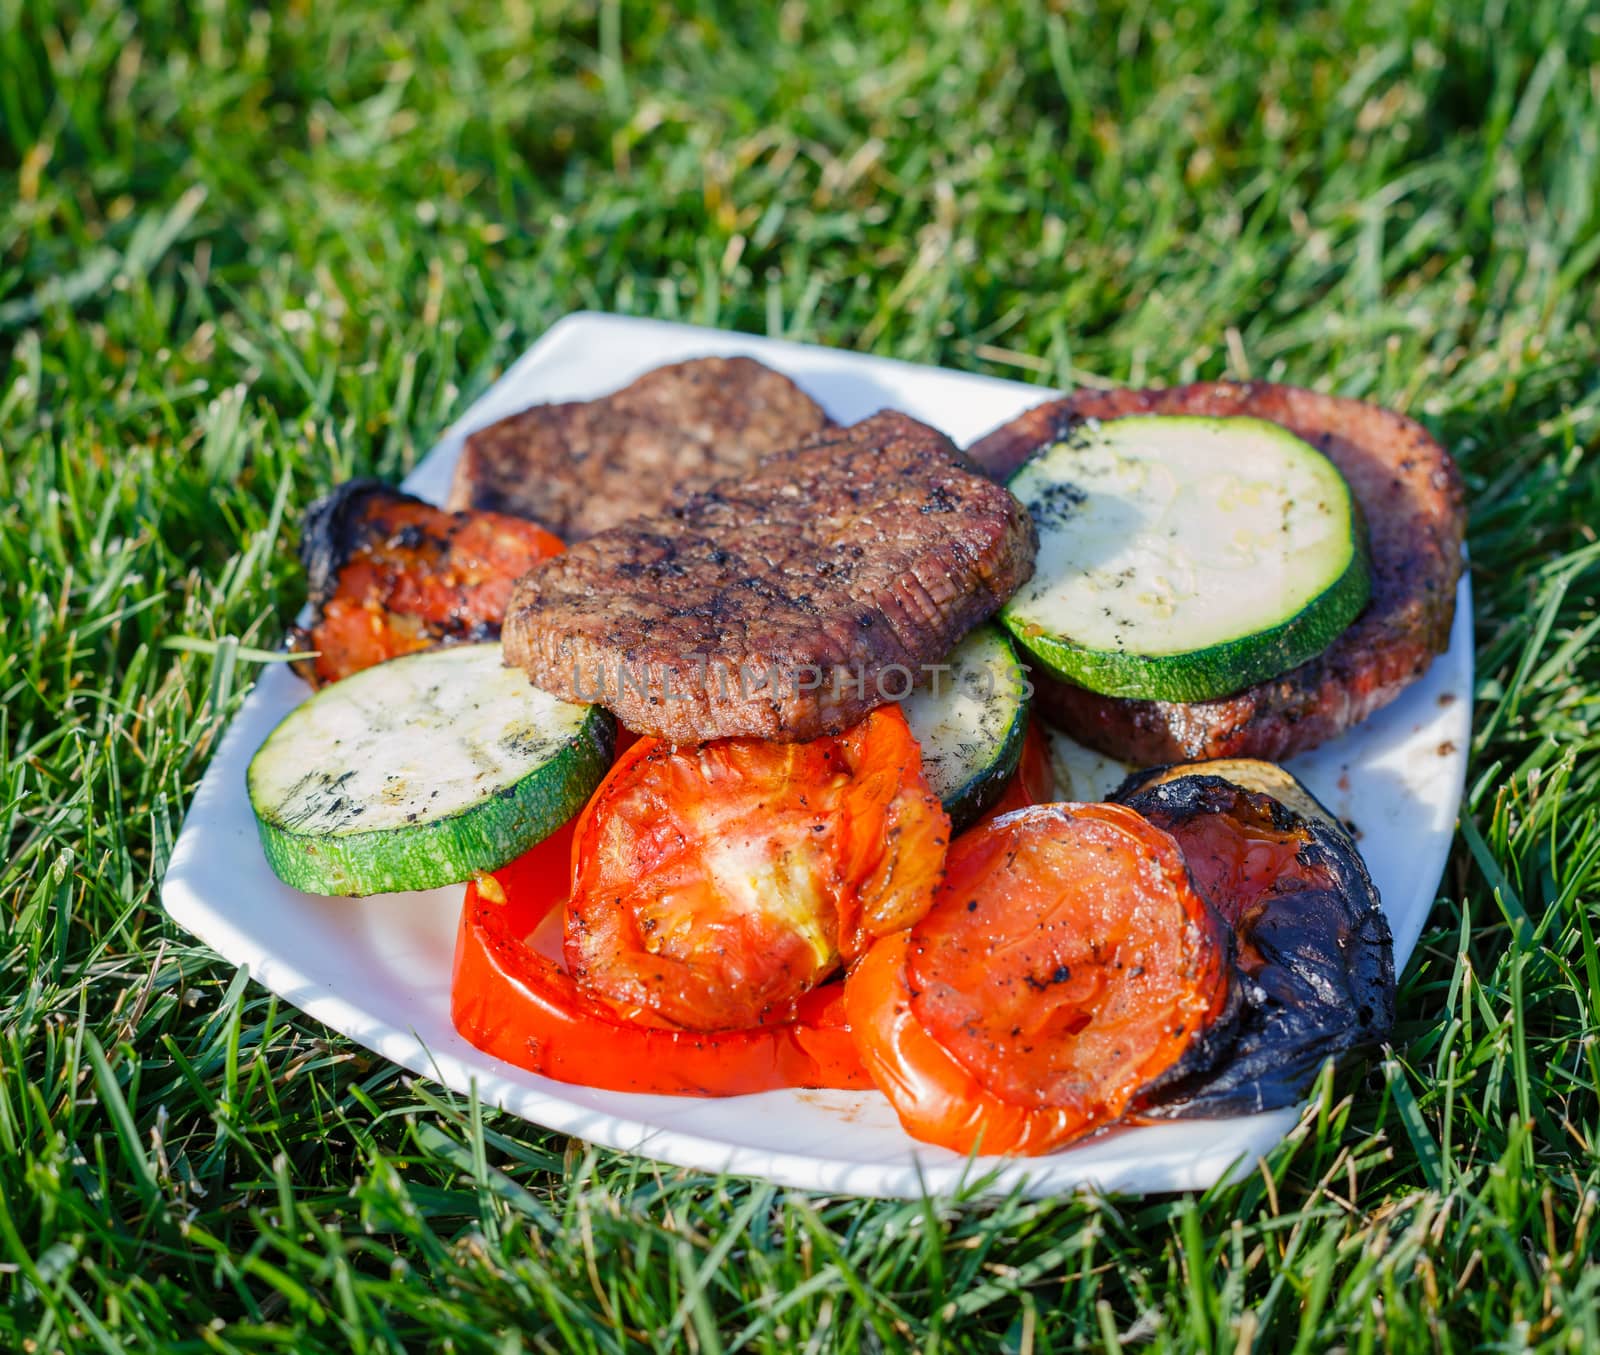 Barbecue on a hot day. Plate of grilled meat and vegetables with green grass background.